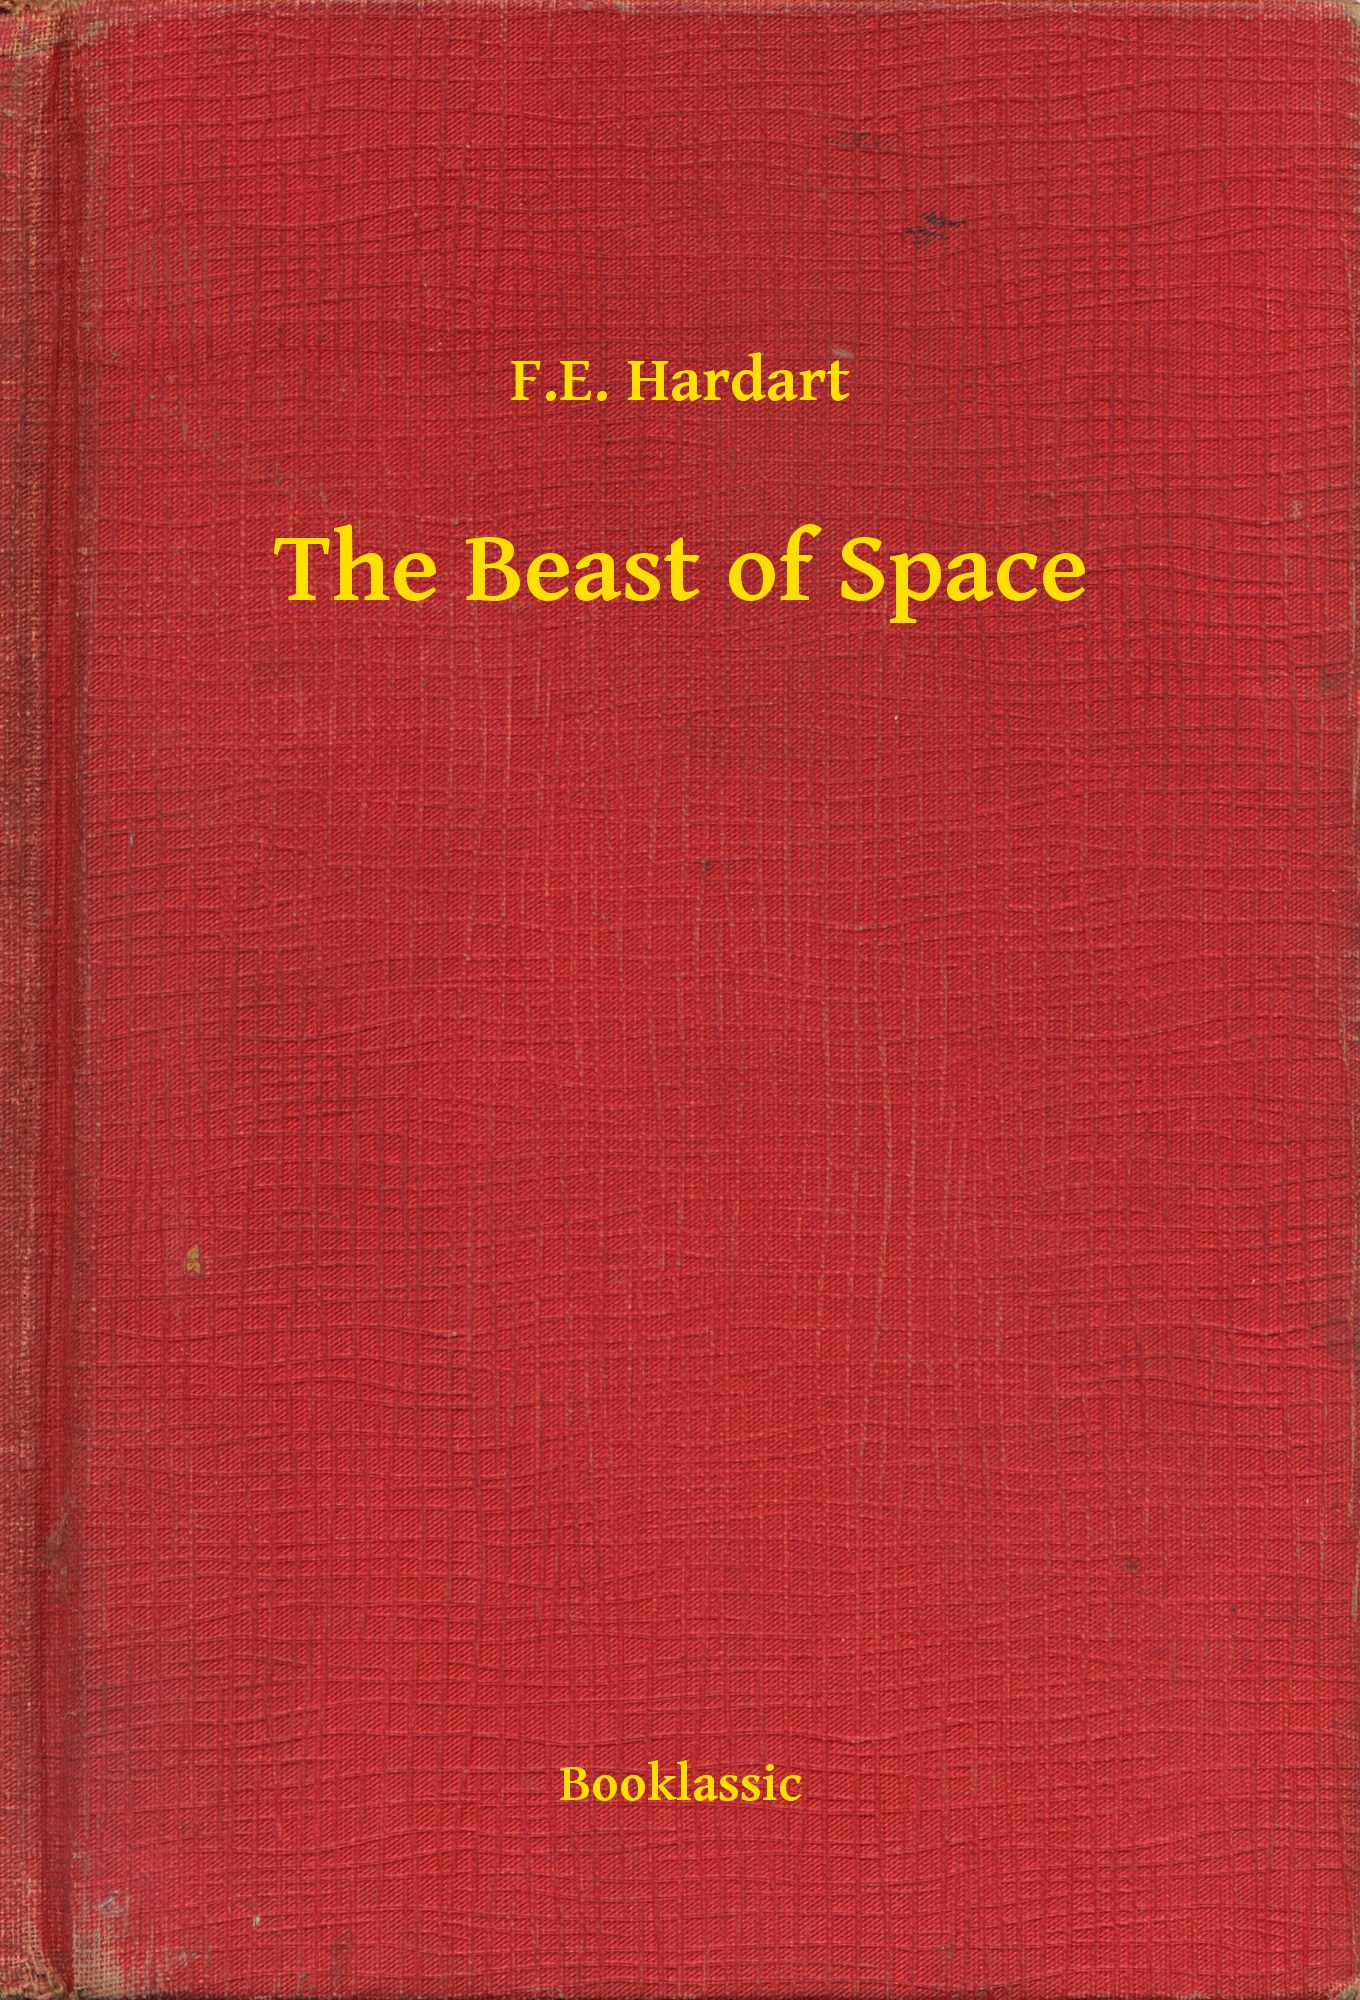 The Beast of Space